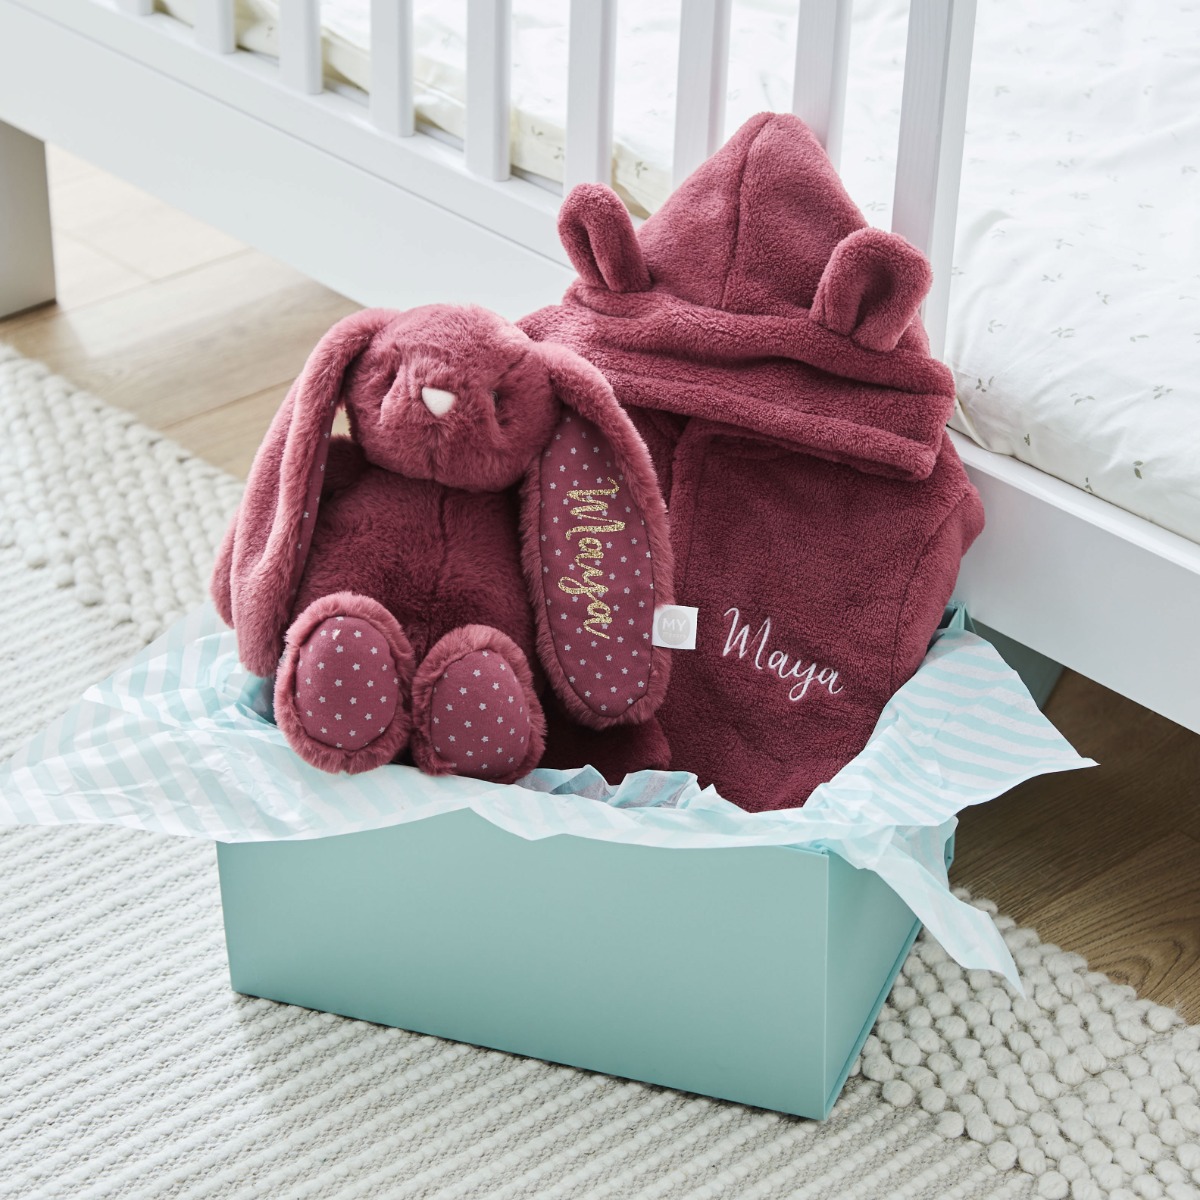 Personalised Berry Robe & Bunny Goodnight Gift Set